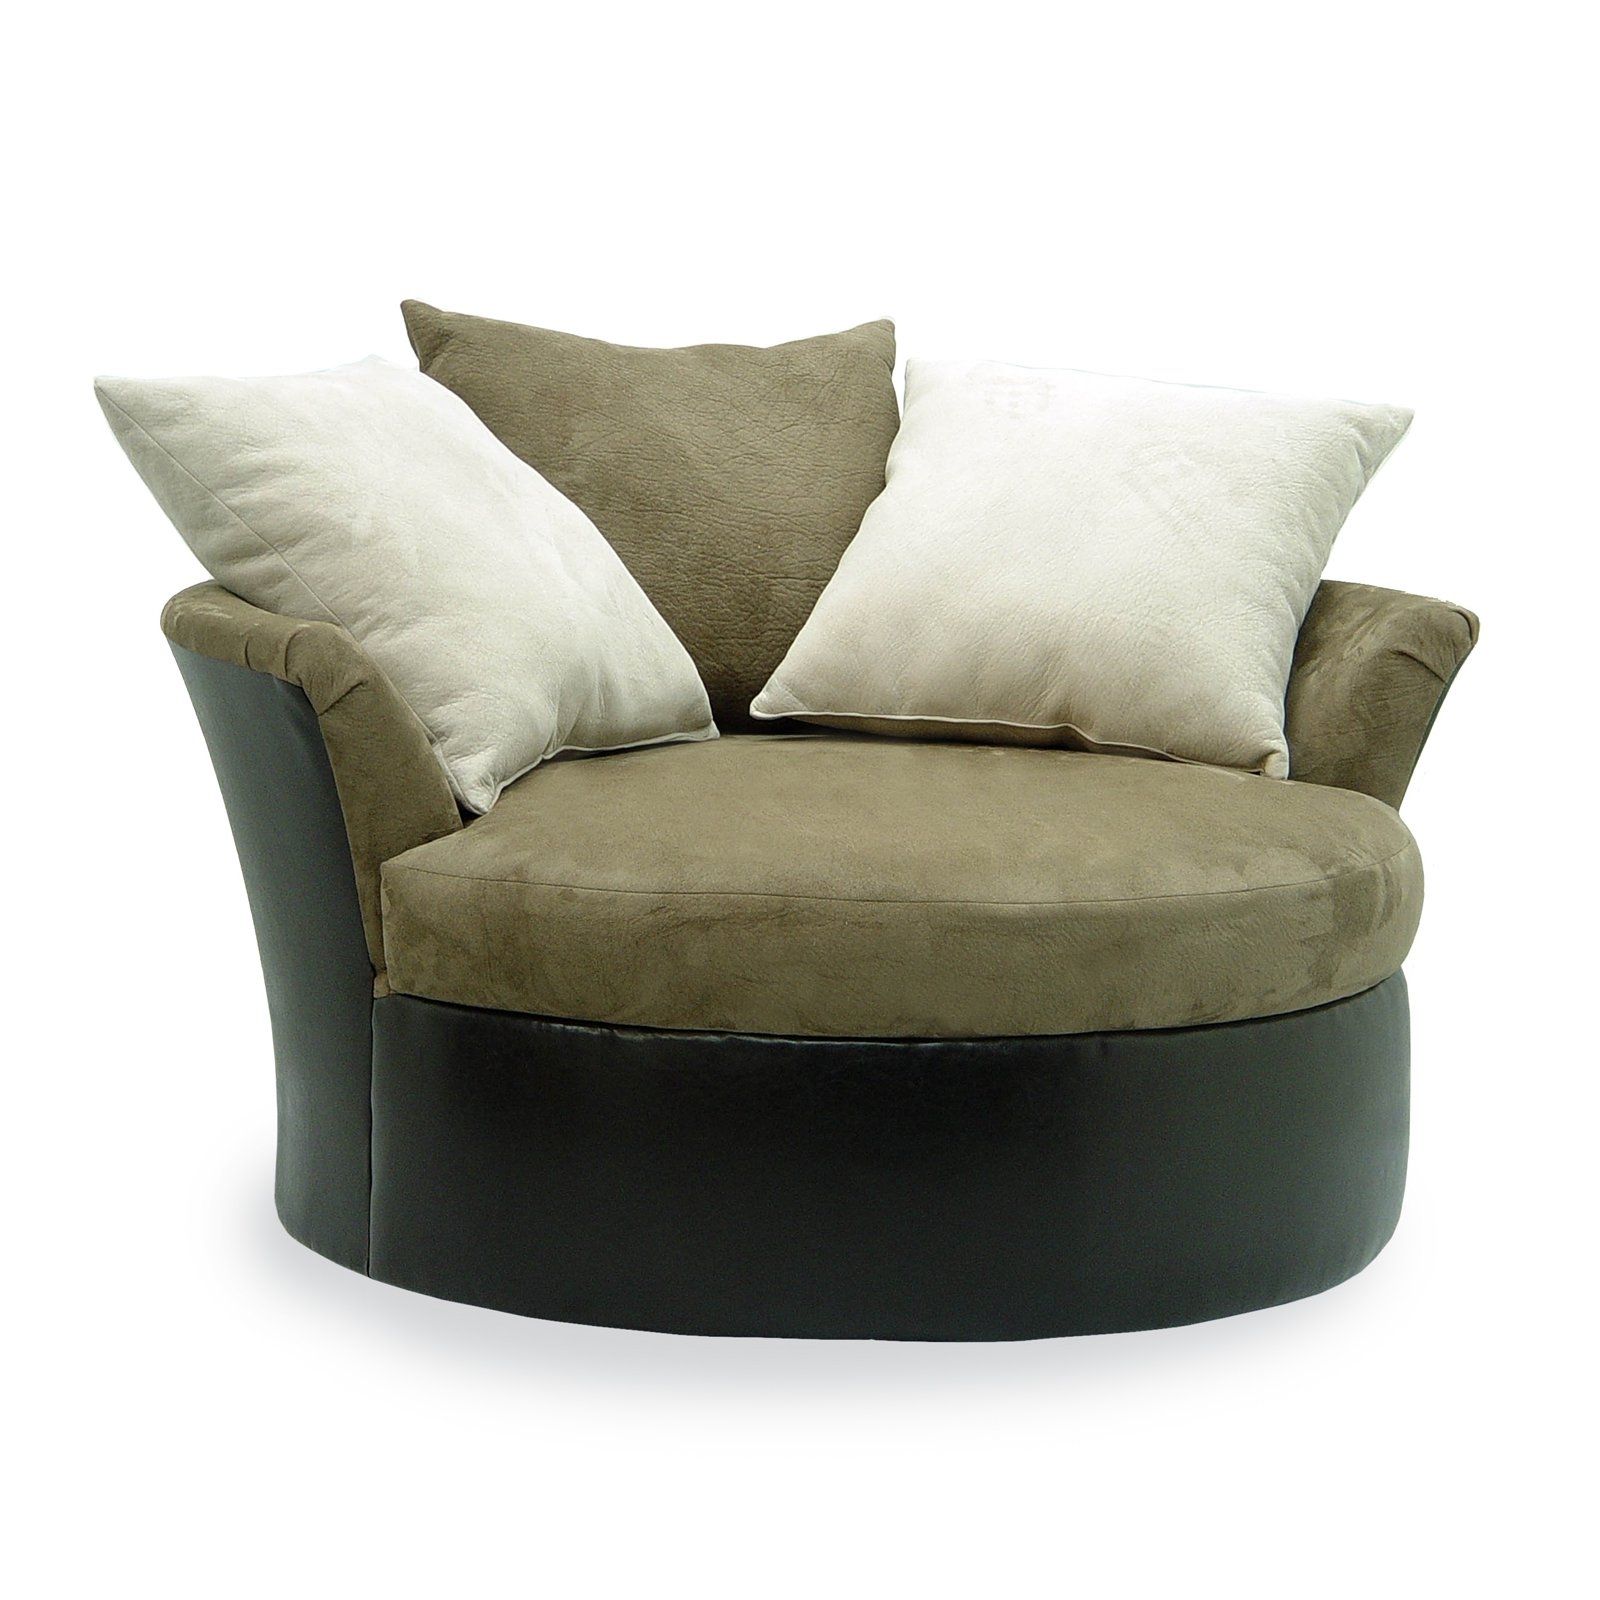 Most Popular Outstanding Round Chaise Lounge Designs – Decofurnish Regarding Round Chaises (Photo 1 of 15)